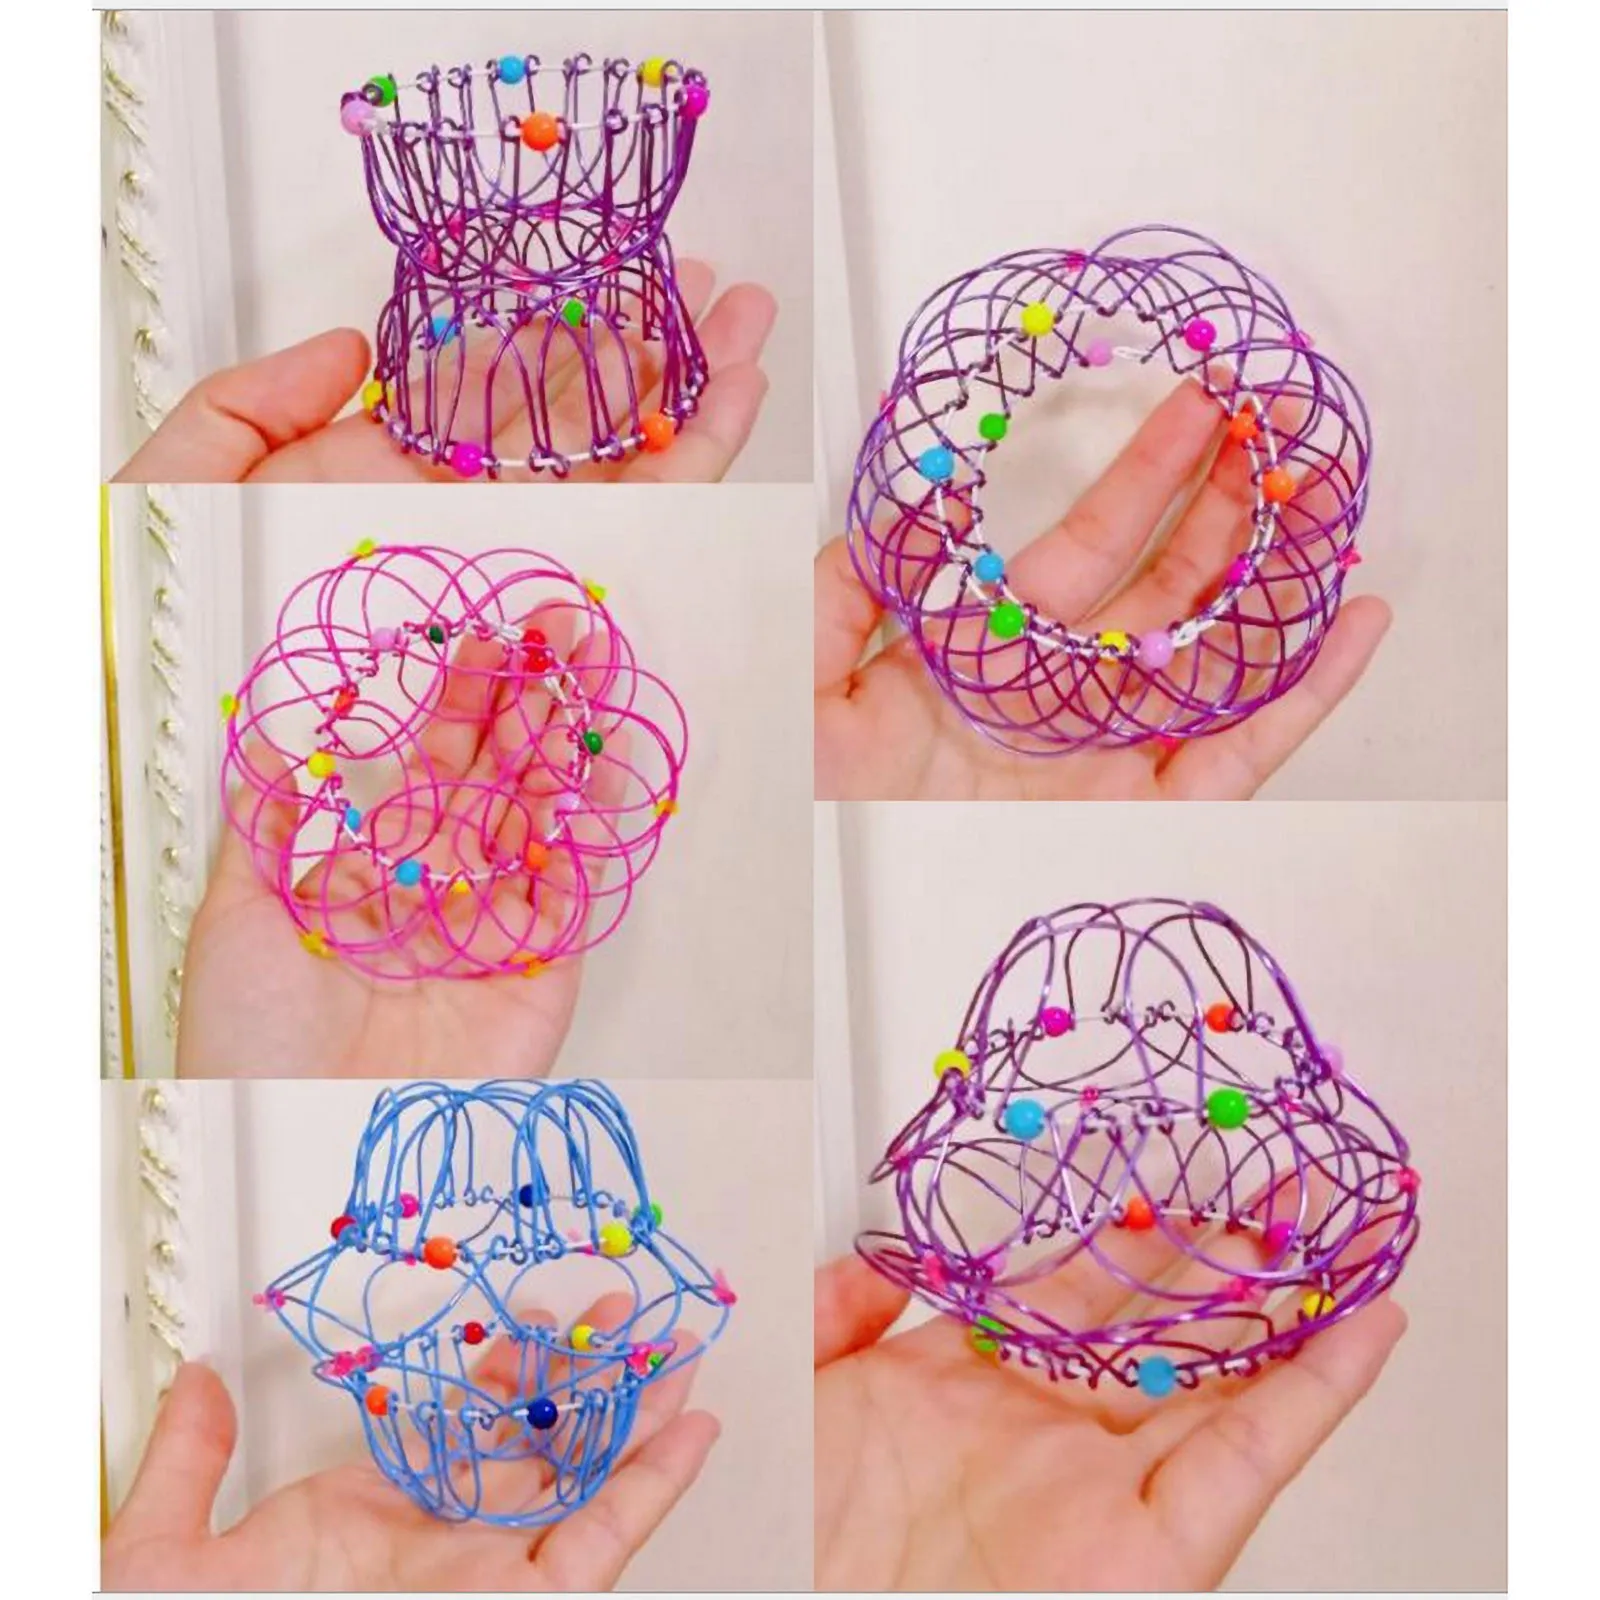 

1/2PC Fidget Toys Make Magic Steel Iron Ring Decompression Flexible Basket Soft Magical Toy Anti Stress Kids Gifts Juguetes 2021